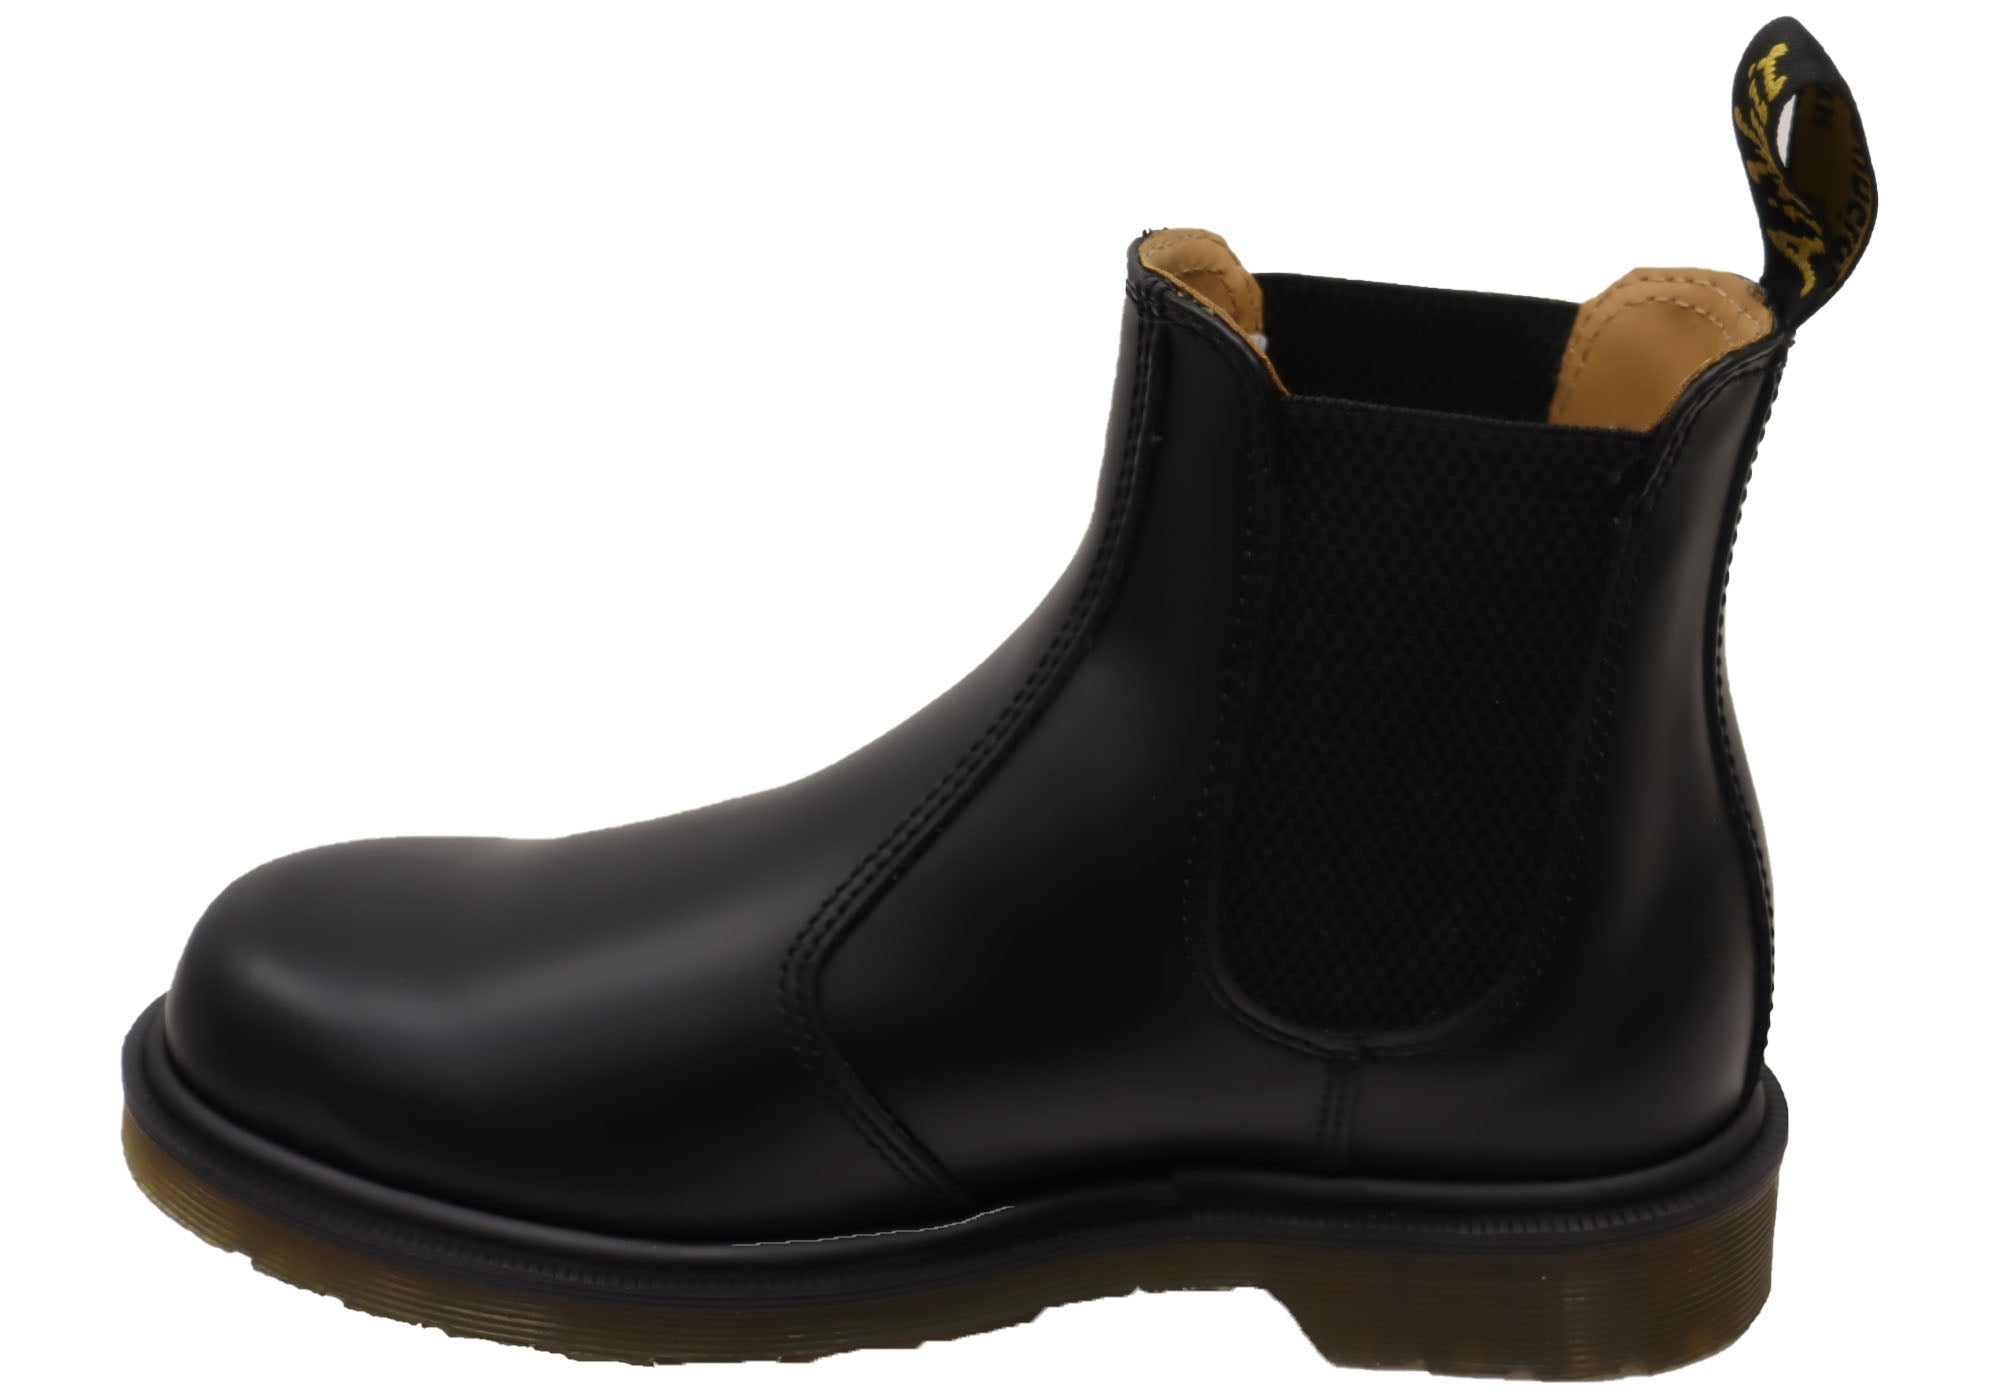 Dr Martens 2976 Black Smooth Unisex Leather Chelsea Boots